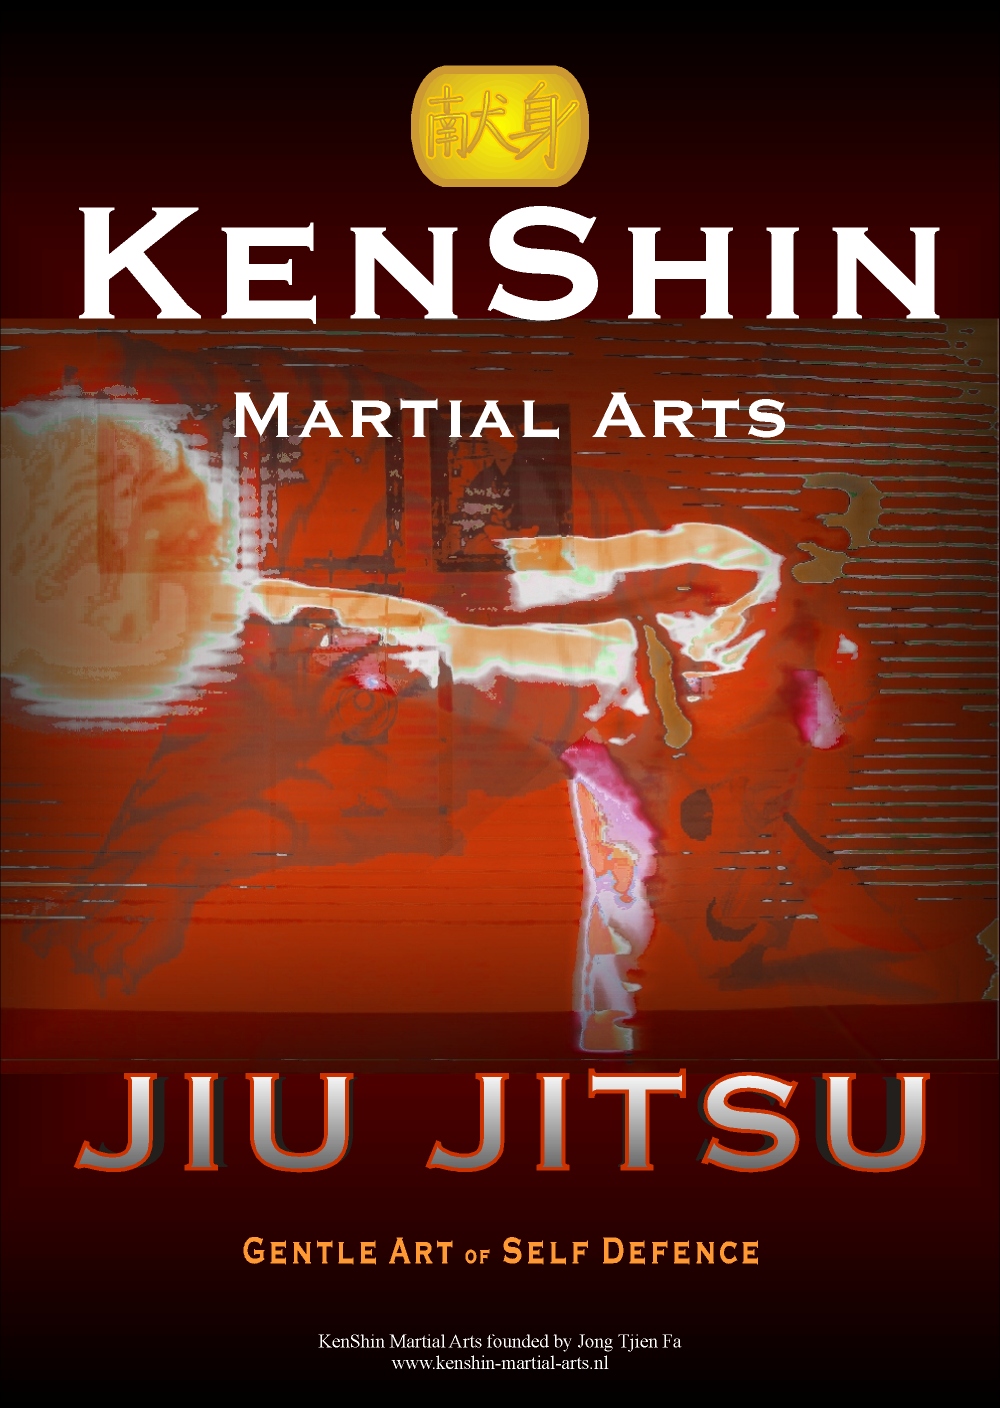 Welcome to KenShin Martial Arts